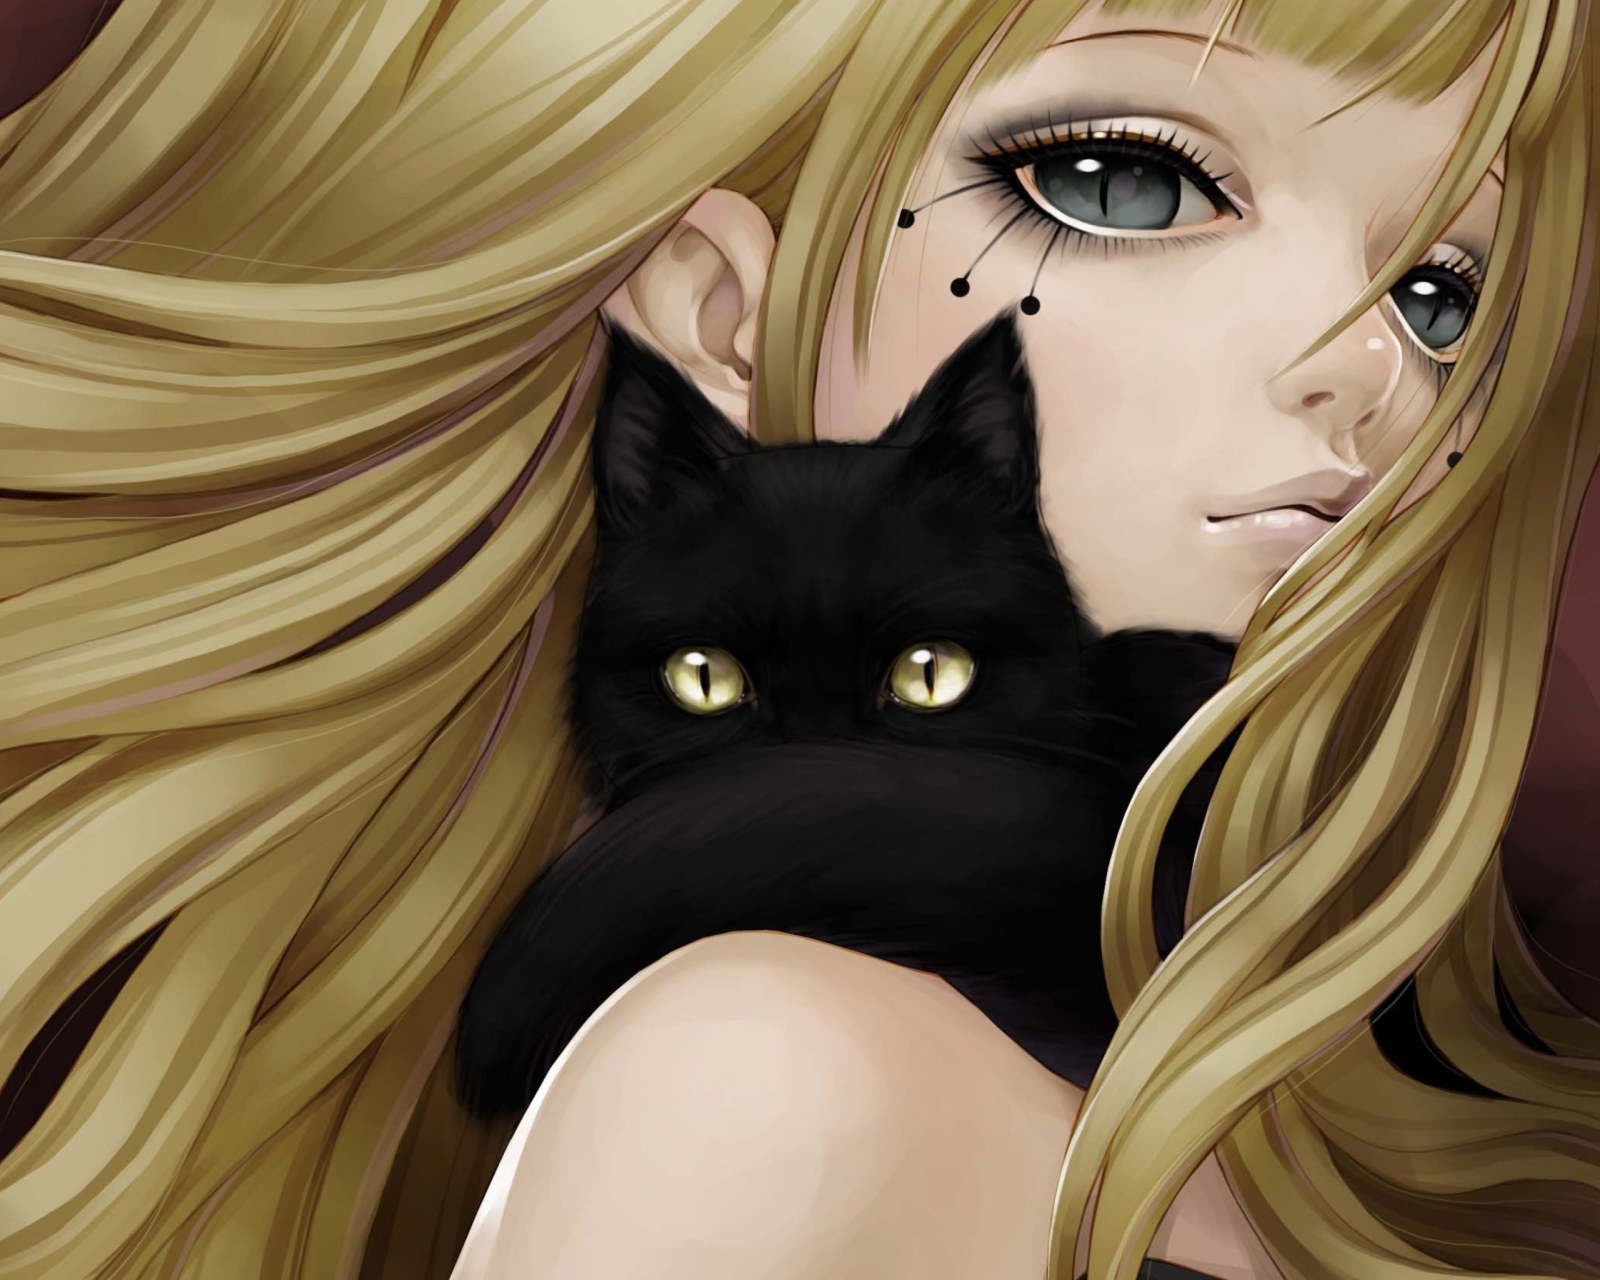 Blonde With Black Cat Drawing wallpaper 1600x1280